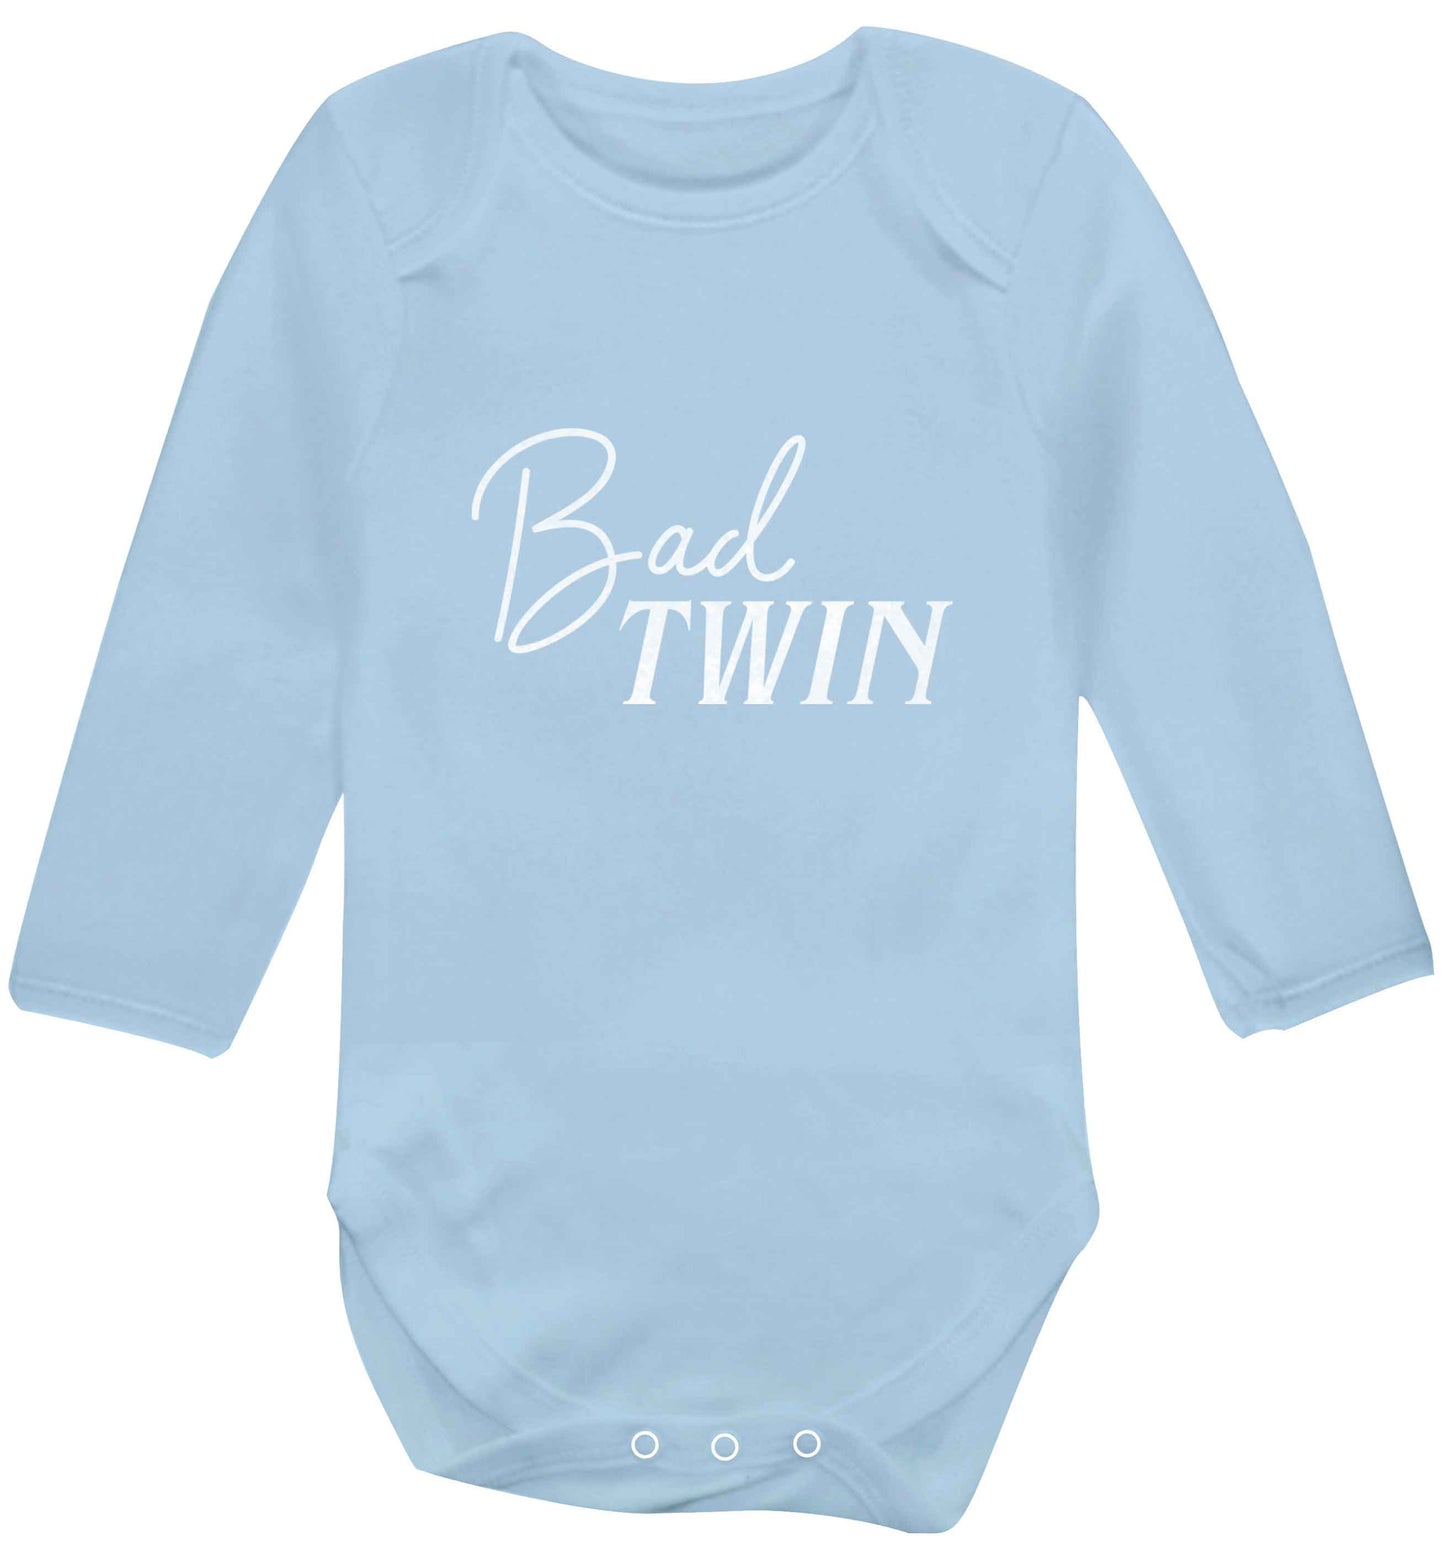 Bad twin baby vest long sleeved pale blue 6-12 months